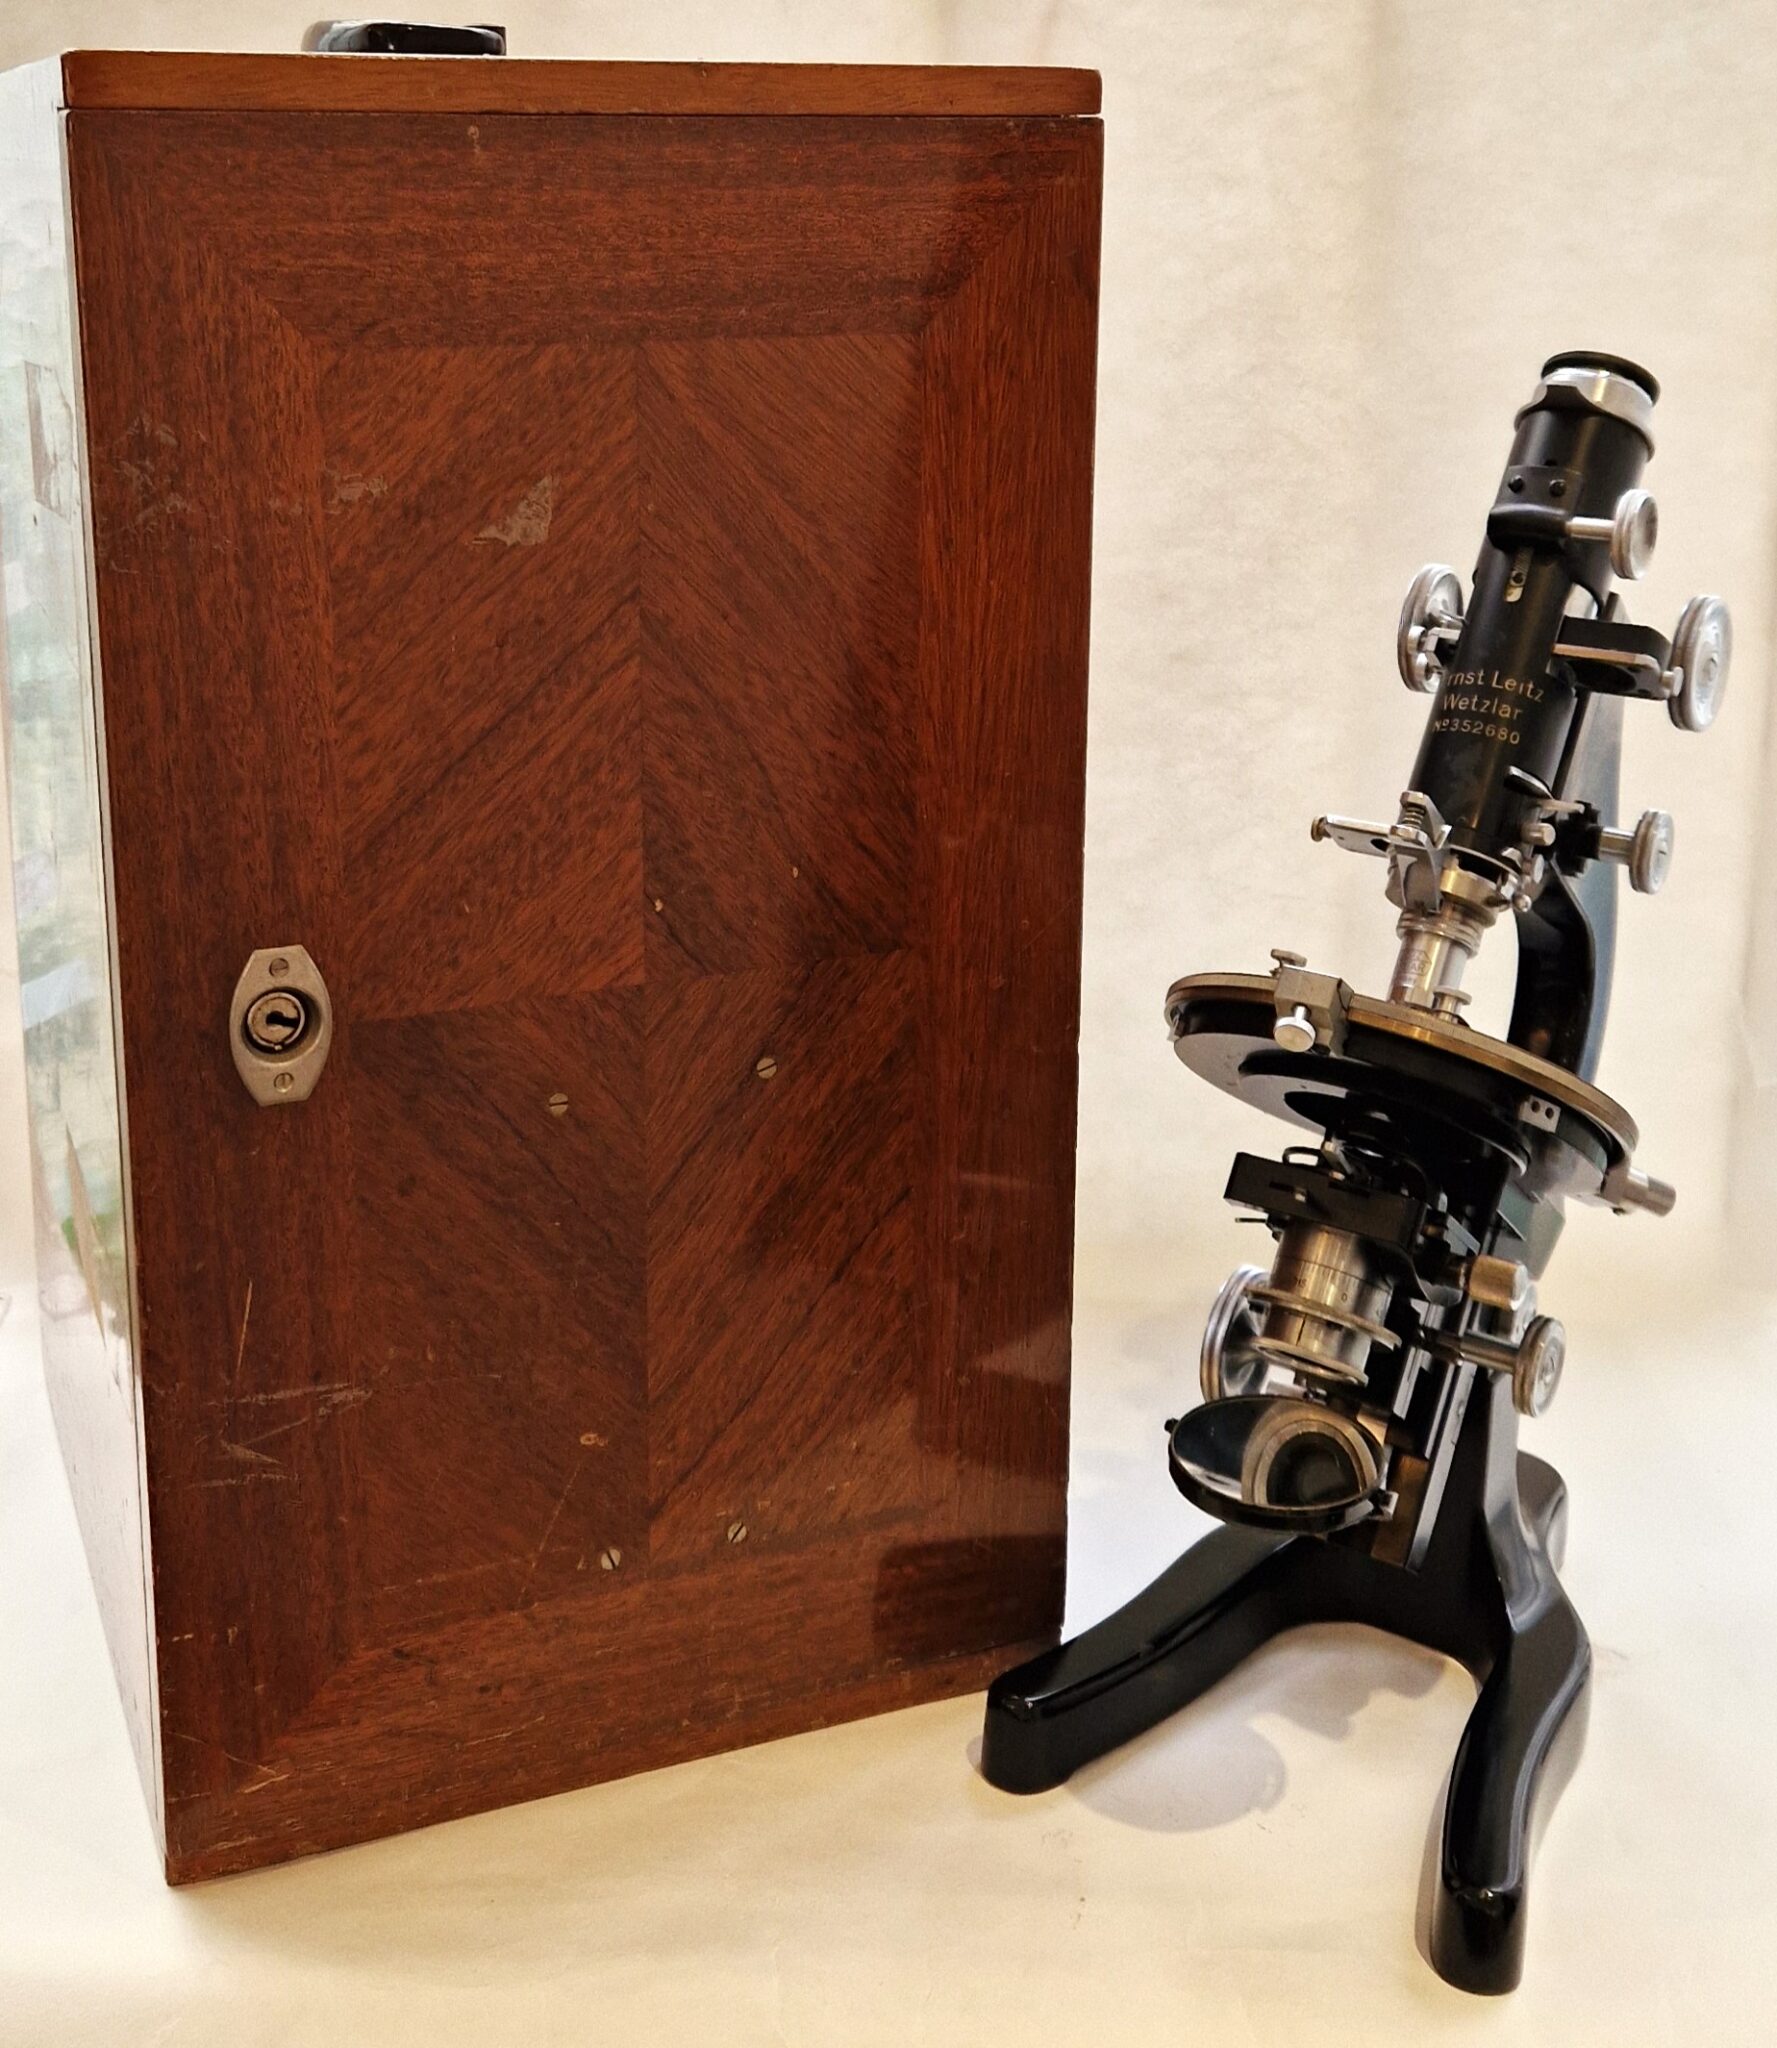 Leitz – The Largest CM model polarizing microscope from the 1930s’